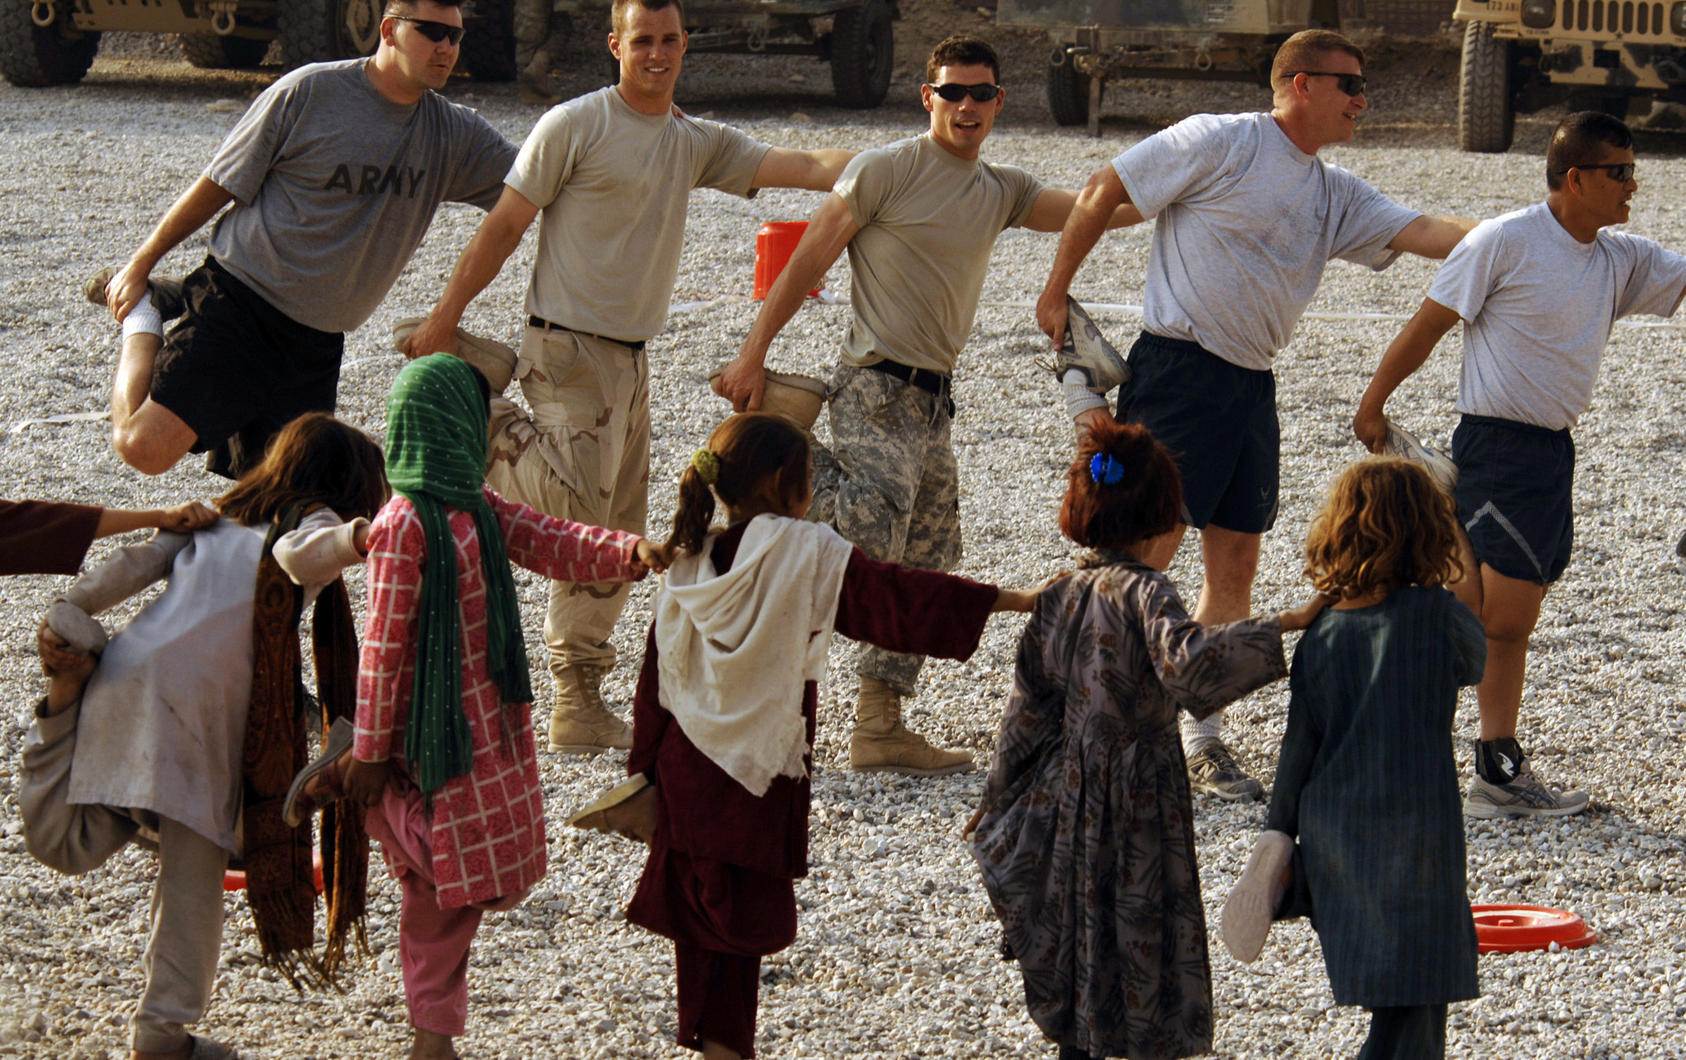 U.S. Army and Air Force personnel and local children stretch before a soccer game at the Nangarhar Provincial Reconstruction Team Forward Operating Base in Jalalabad, Afghanistan.